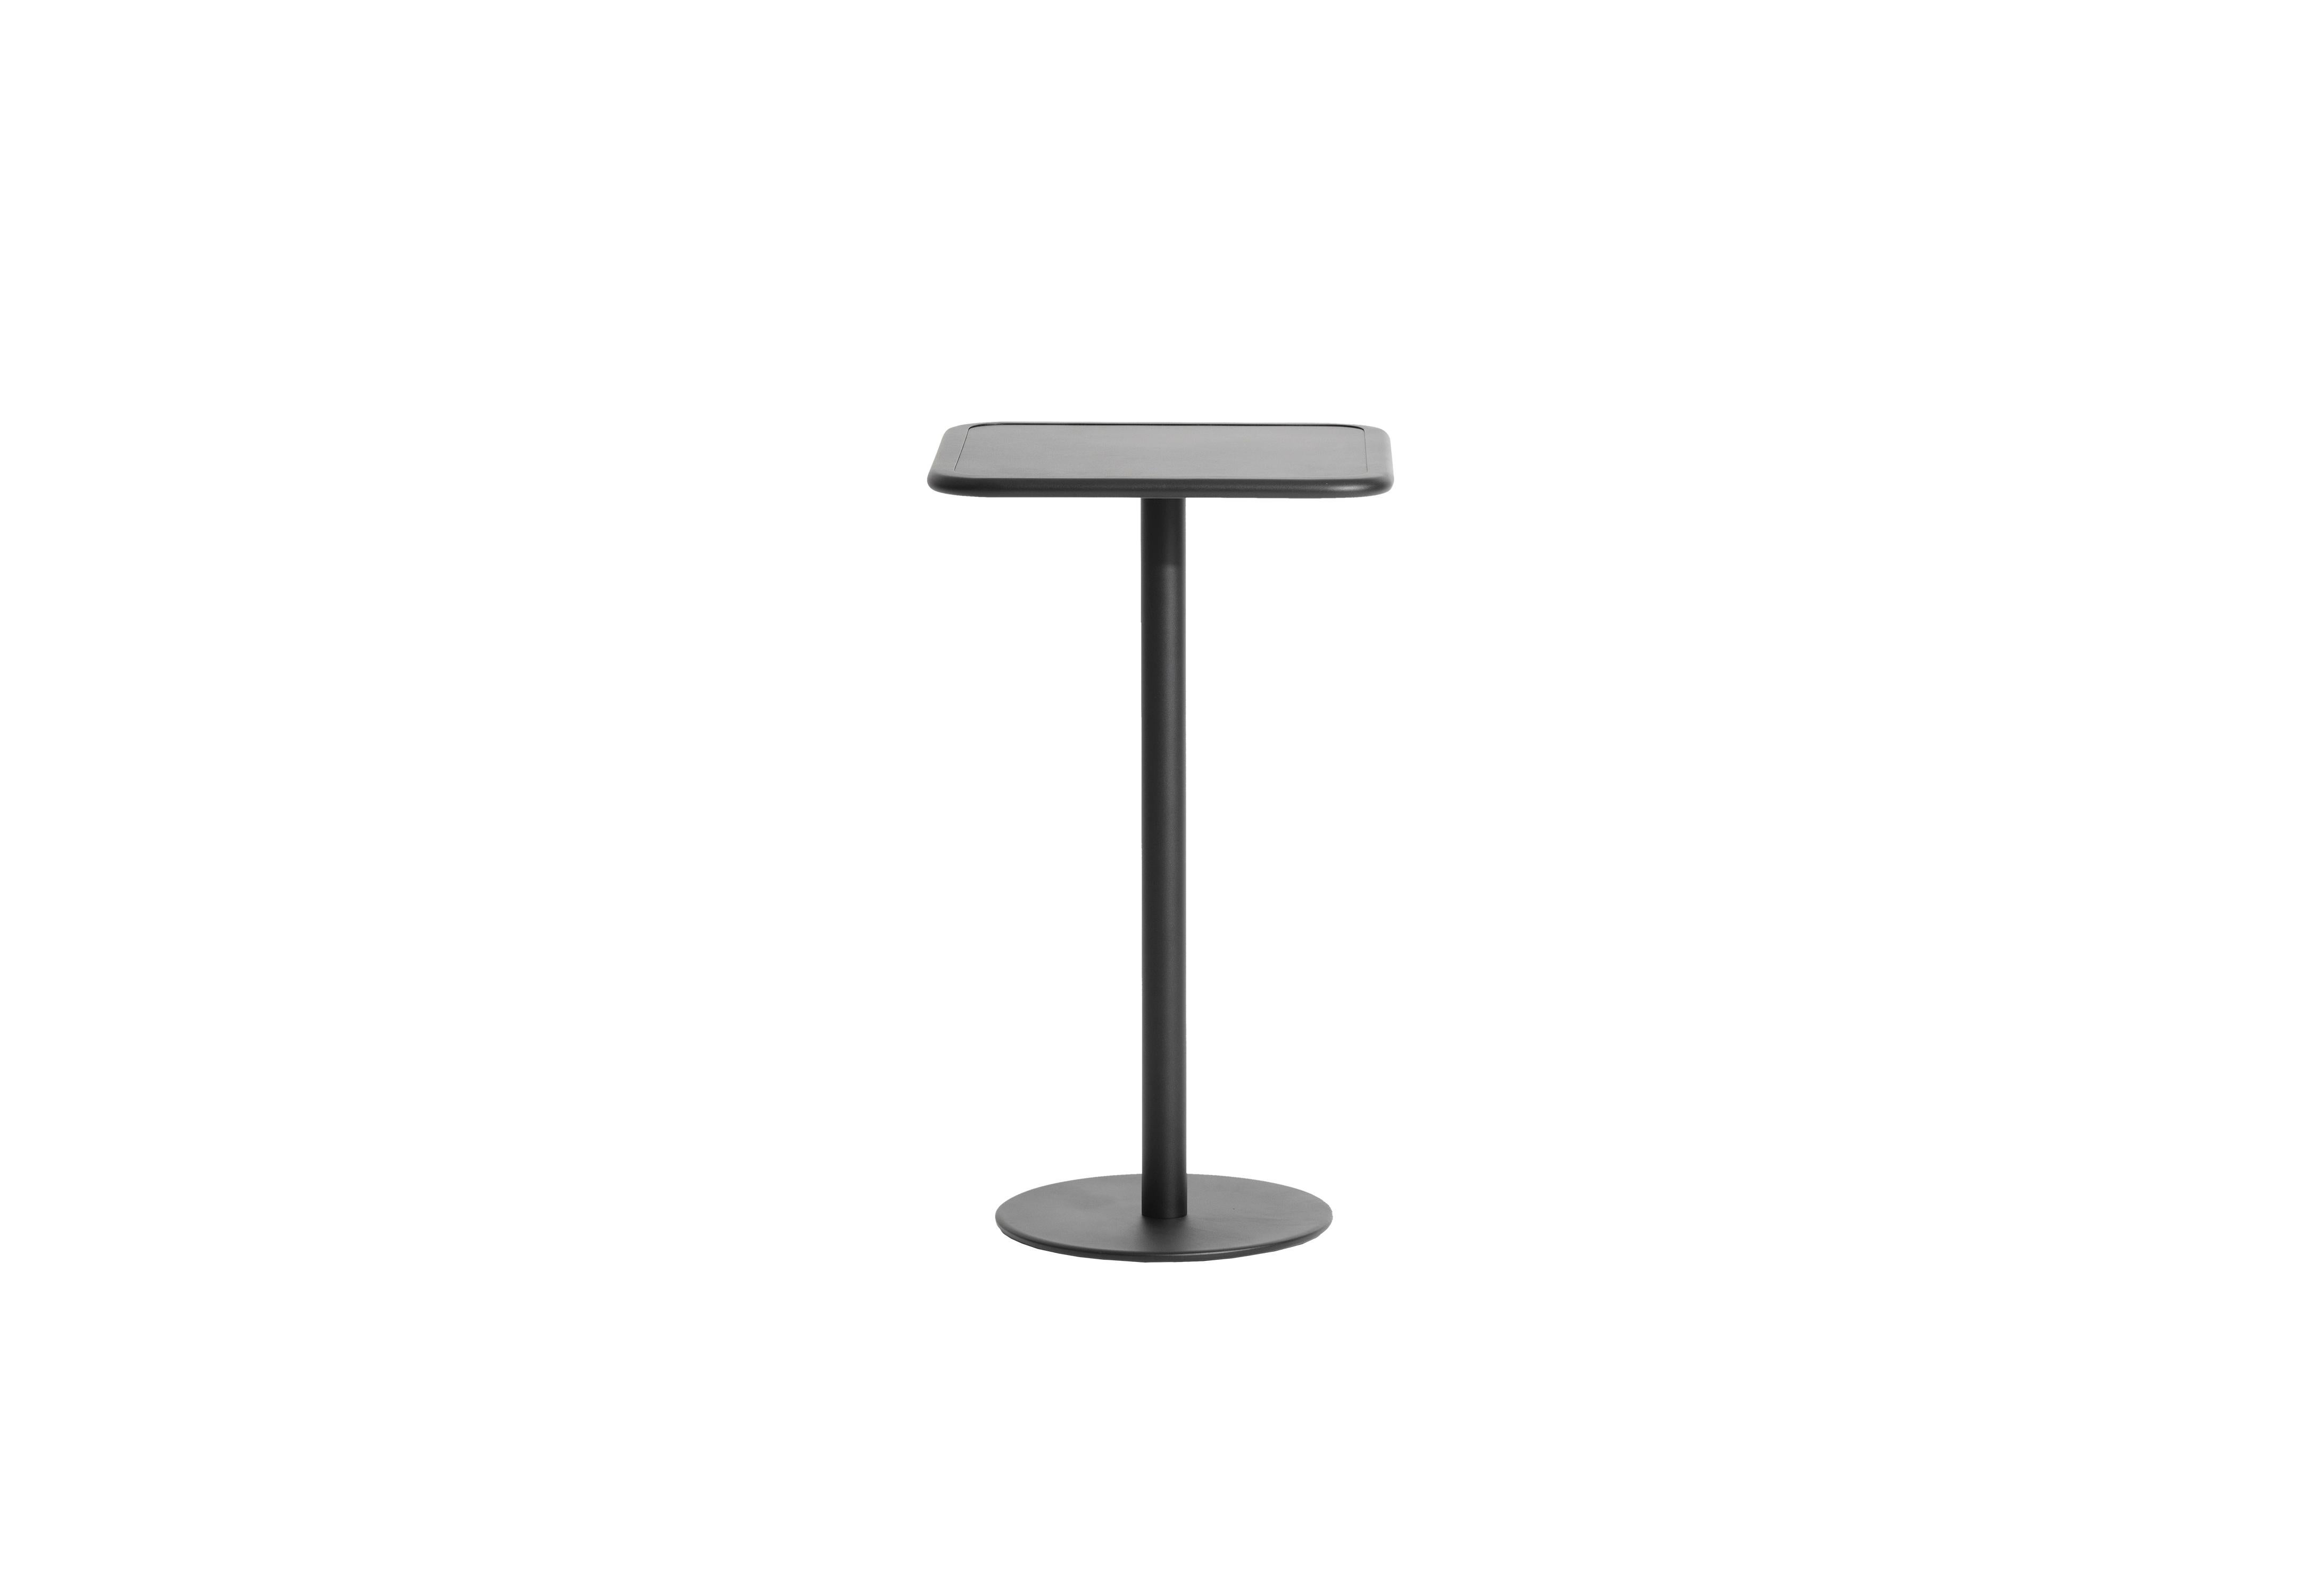 Petite Friture Week-End Square High Table in Black Aluminium by Studio BrichetZiegler, 2017

The week-end collection is a full range of outdoor furniture, in aluminium grained epoxy paint, matt finish, that includes 18 functions and 8 colours for